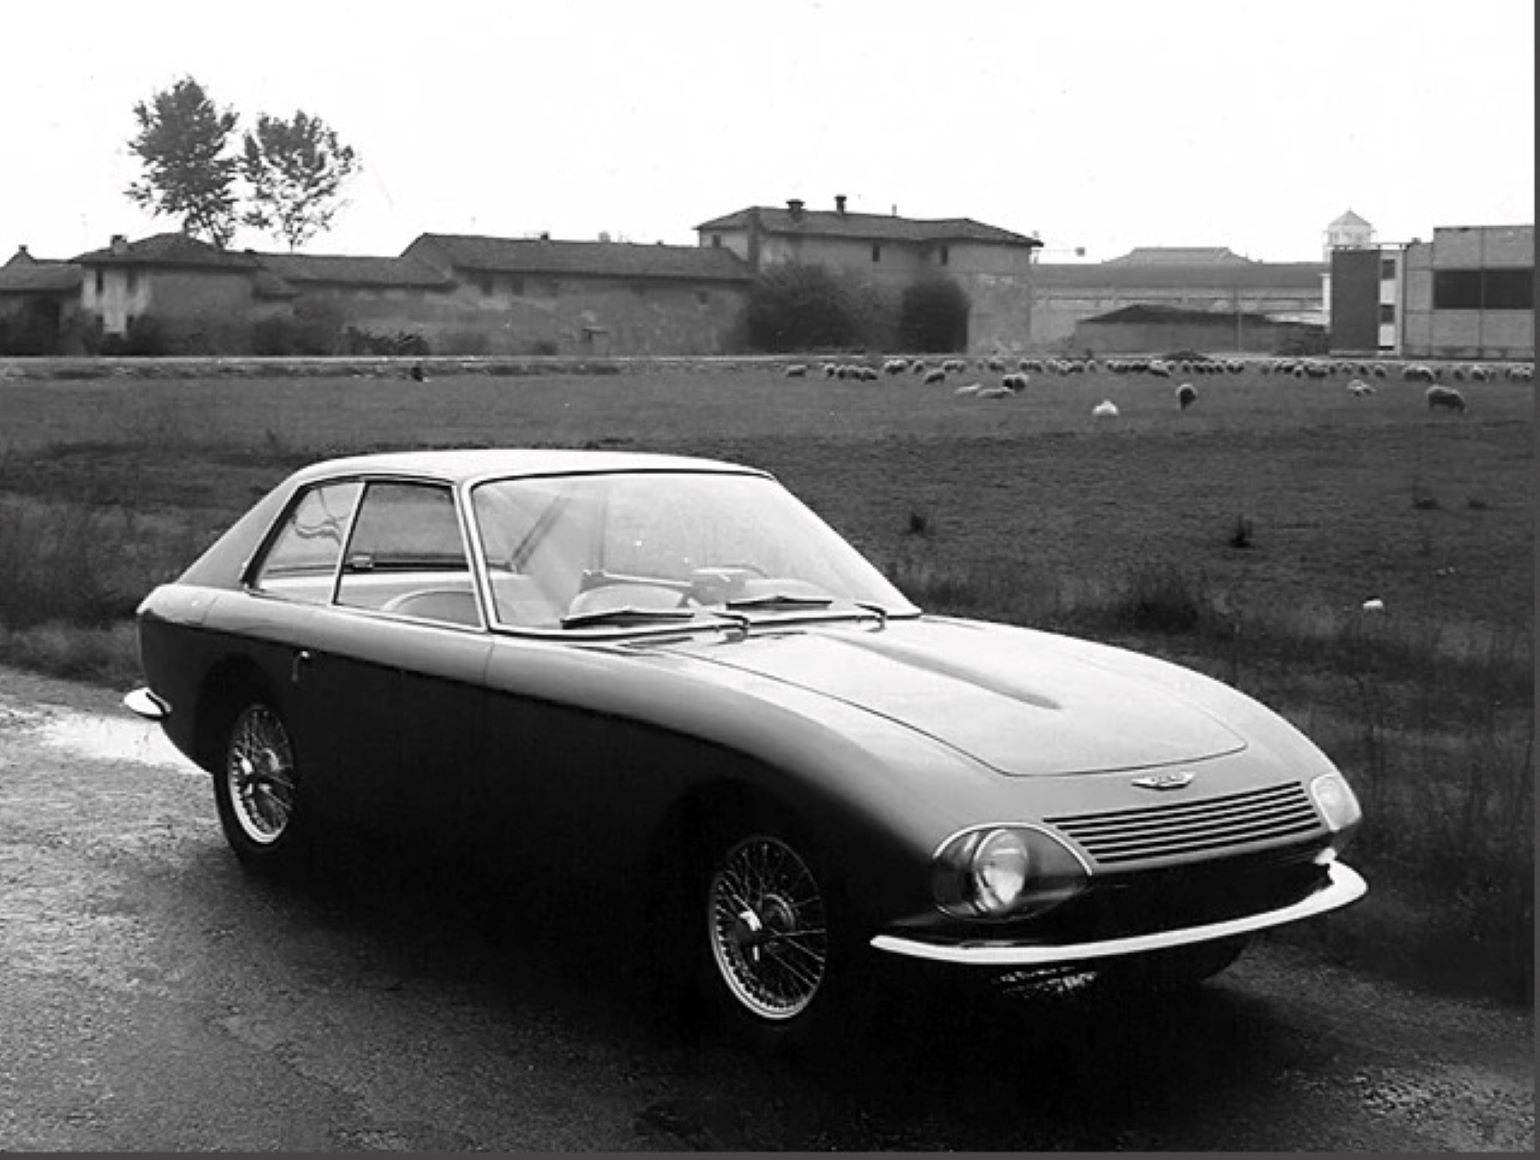 Name:  AH 3000 #2121 AH 3000 Coupe Pininfarina photo front 3-4 arch Classic and Recreation Sportscars.jpg
Views: 207
Size:  171.0 KB